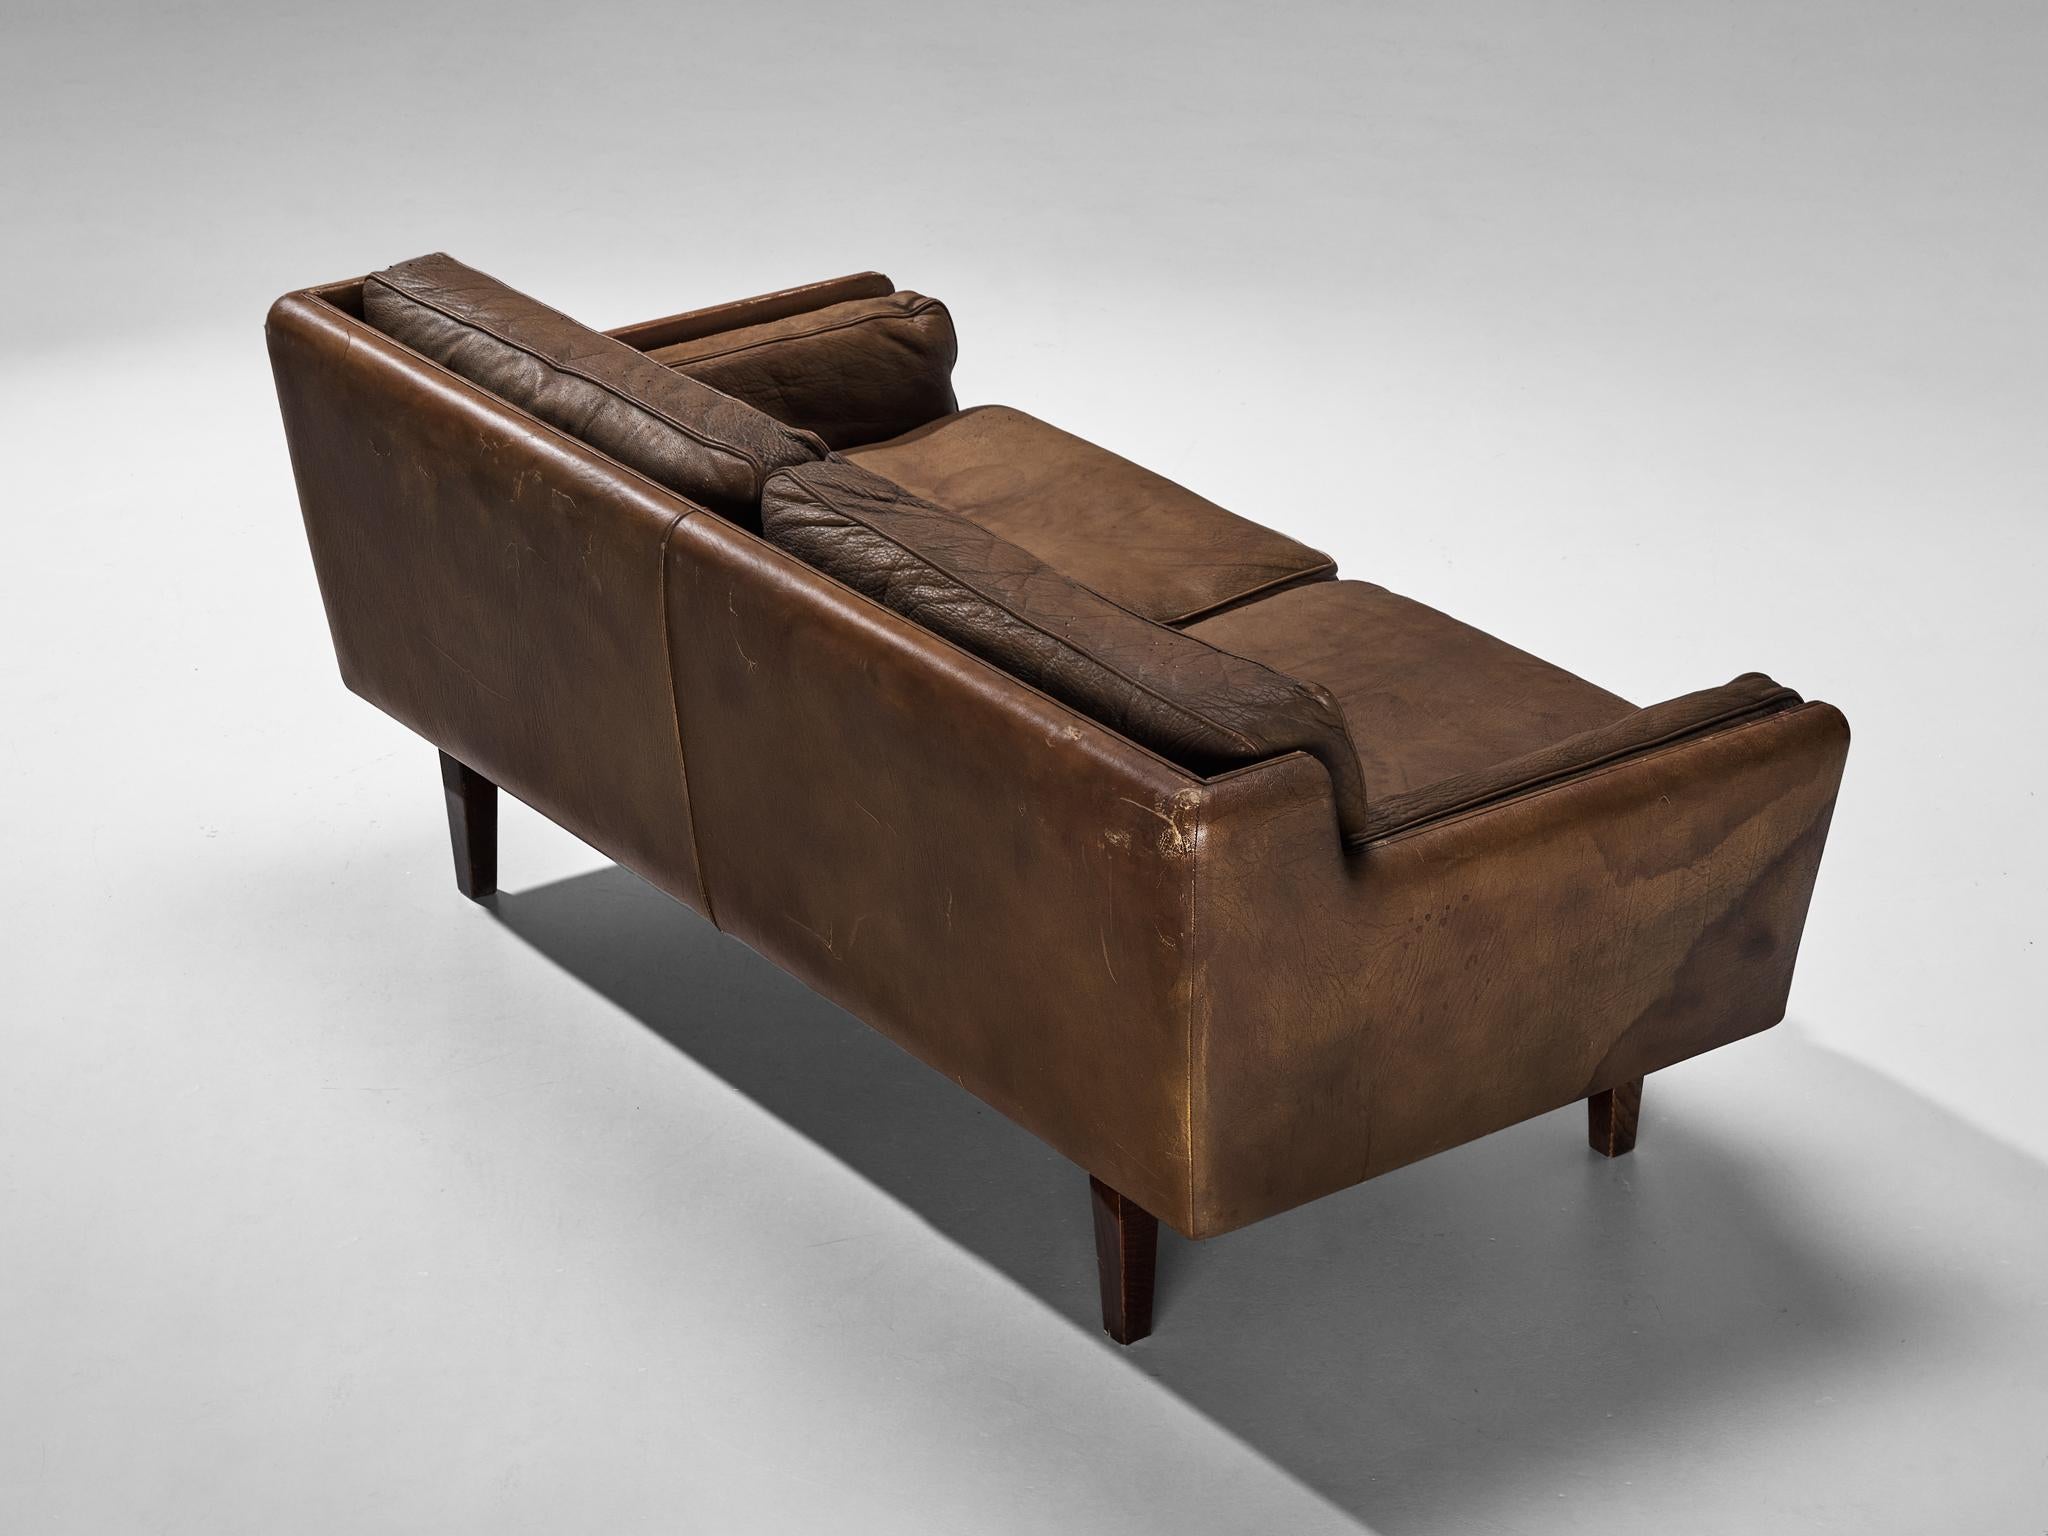 Illum Wikkelsø, two-seat sofa, leather, stained wood, Denmark, 1960s

A design by Illum Wikkelsø featuring modest and subtle lines and shapes that emphasize the clear construction of the design. The sofa rests on a well-proportioned base that lifts